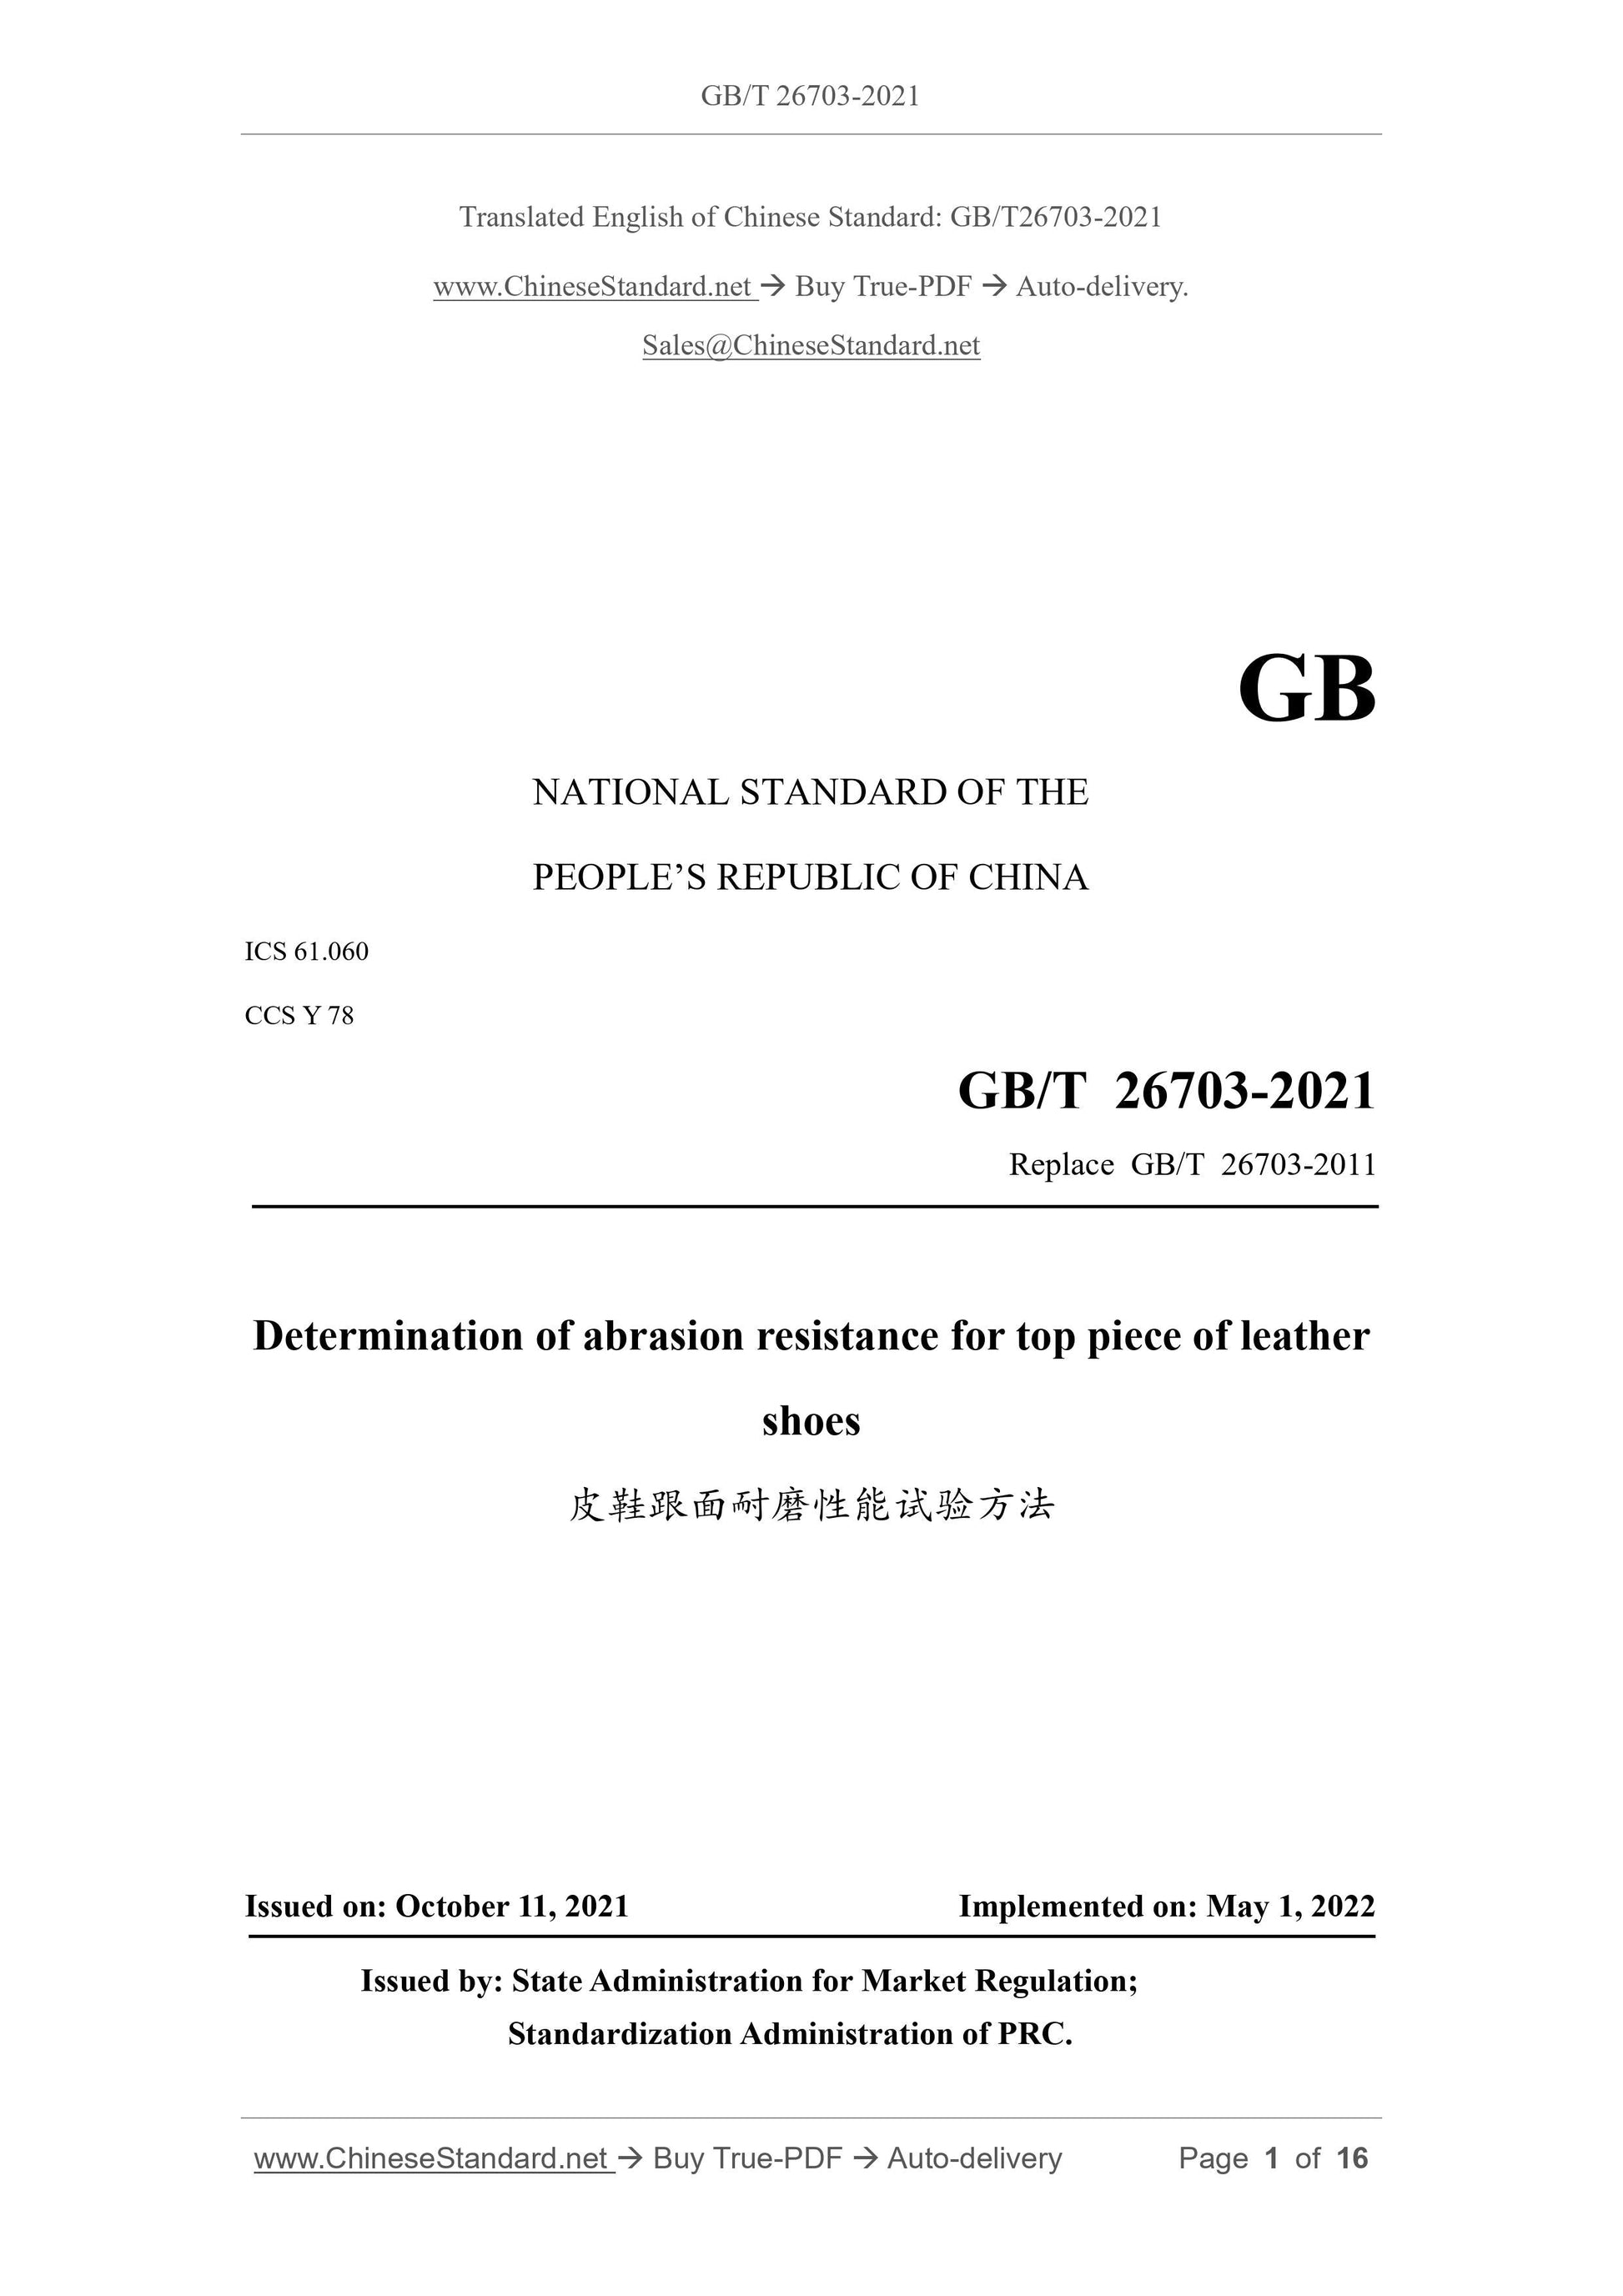 GB/T 26703-2021 Page 1